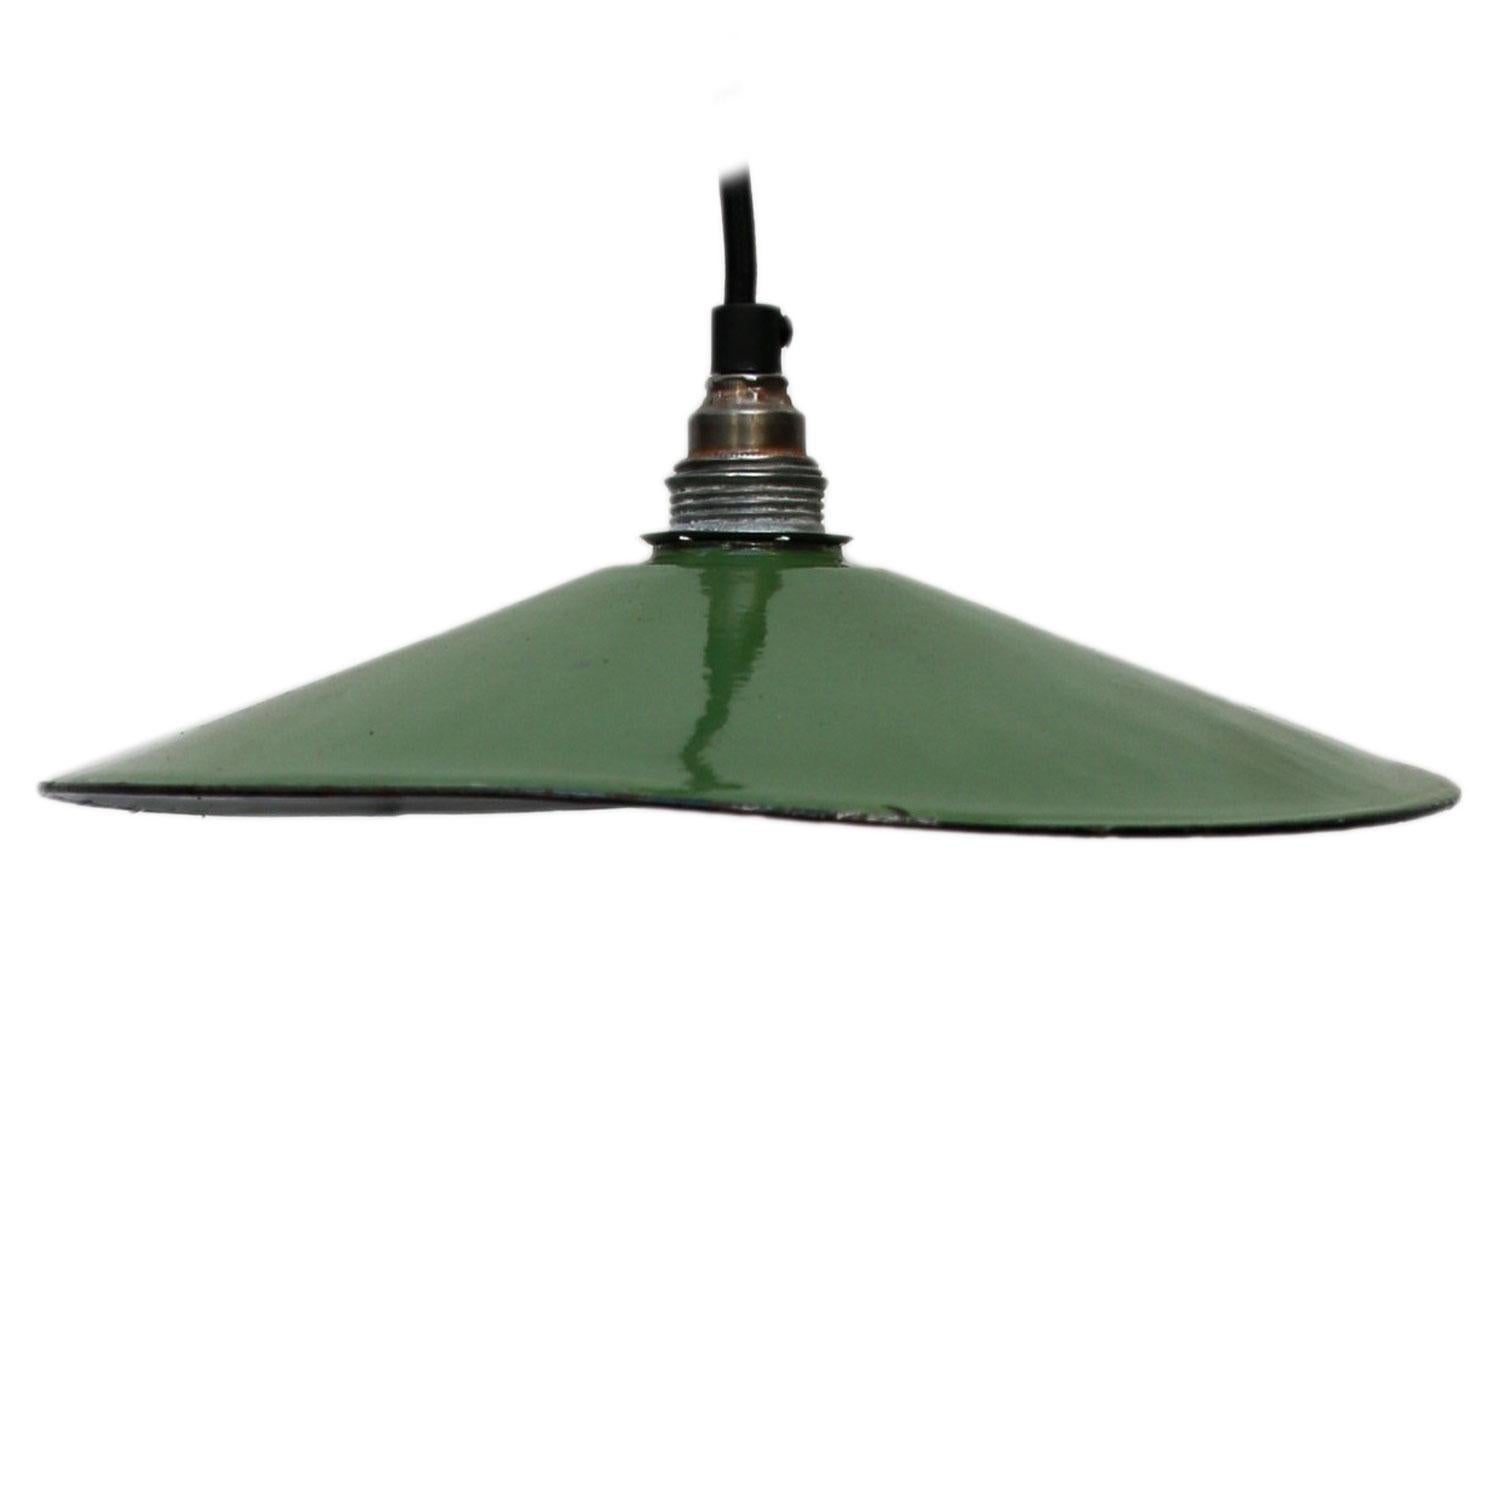 Small French industrial pendant.

Measure: Weight 0.3 kg / 0.7 lb

Priced per individual item. All lamps have been made suitable by international standards for incandescent light bulbs, energy-efficient and LED bulbs. E26/E27 bulb holders and new